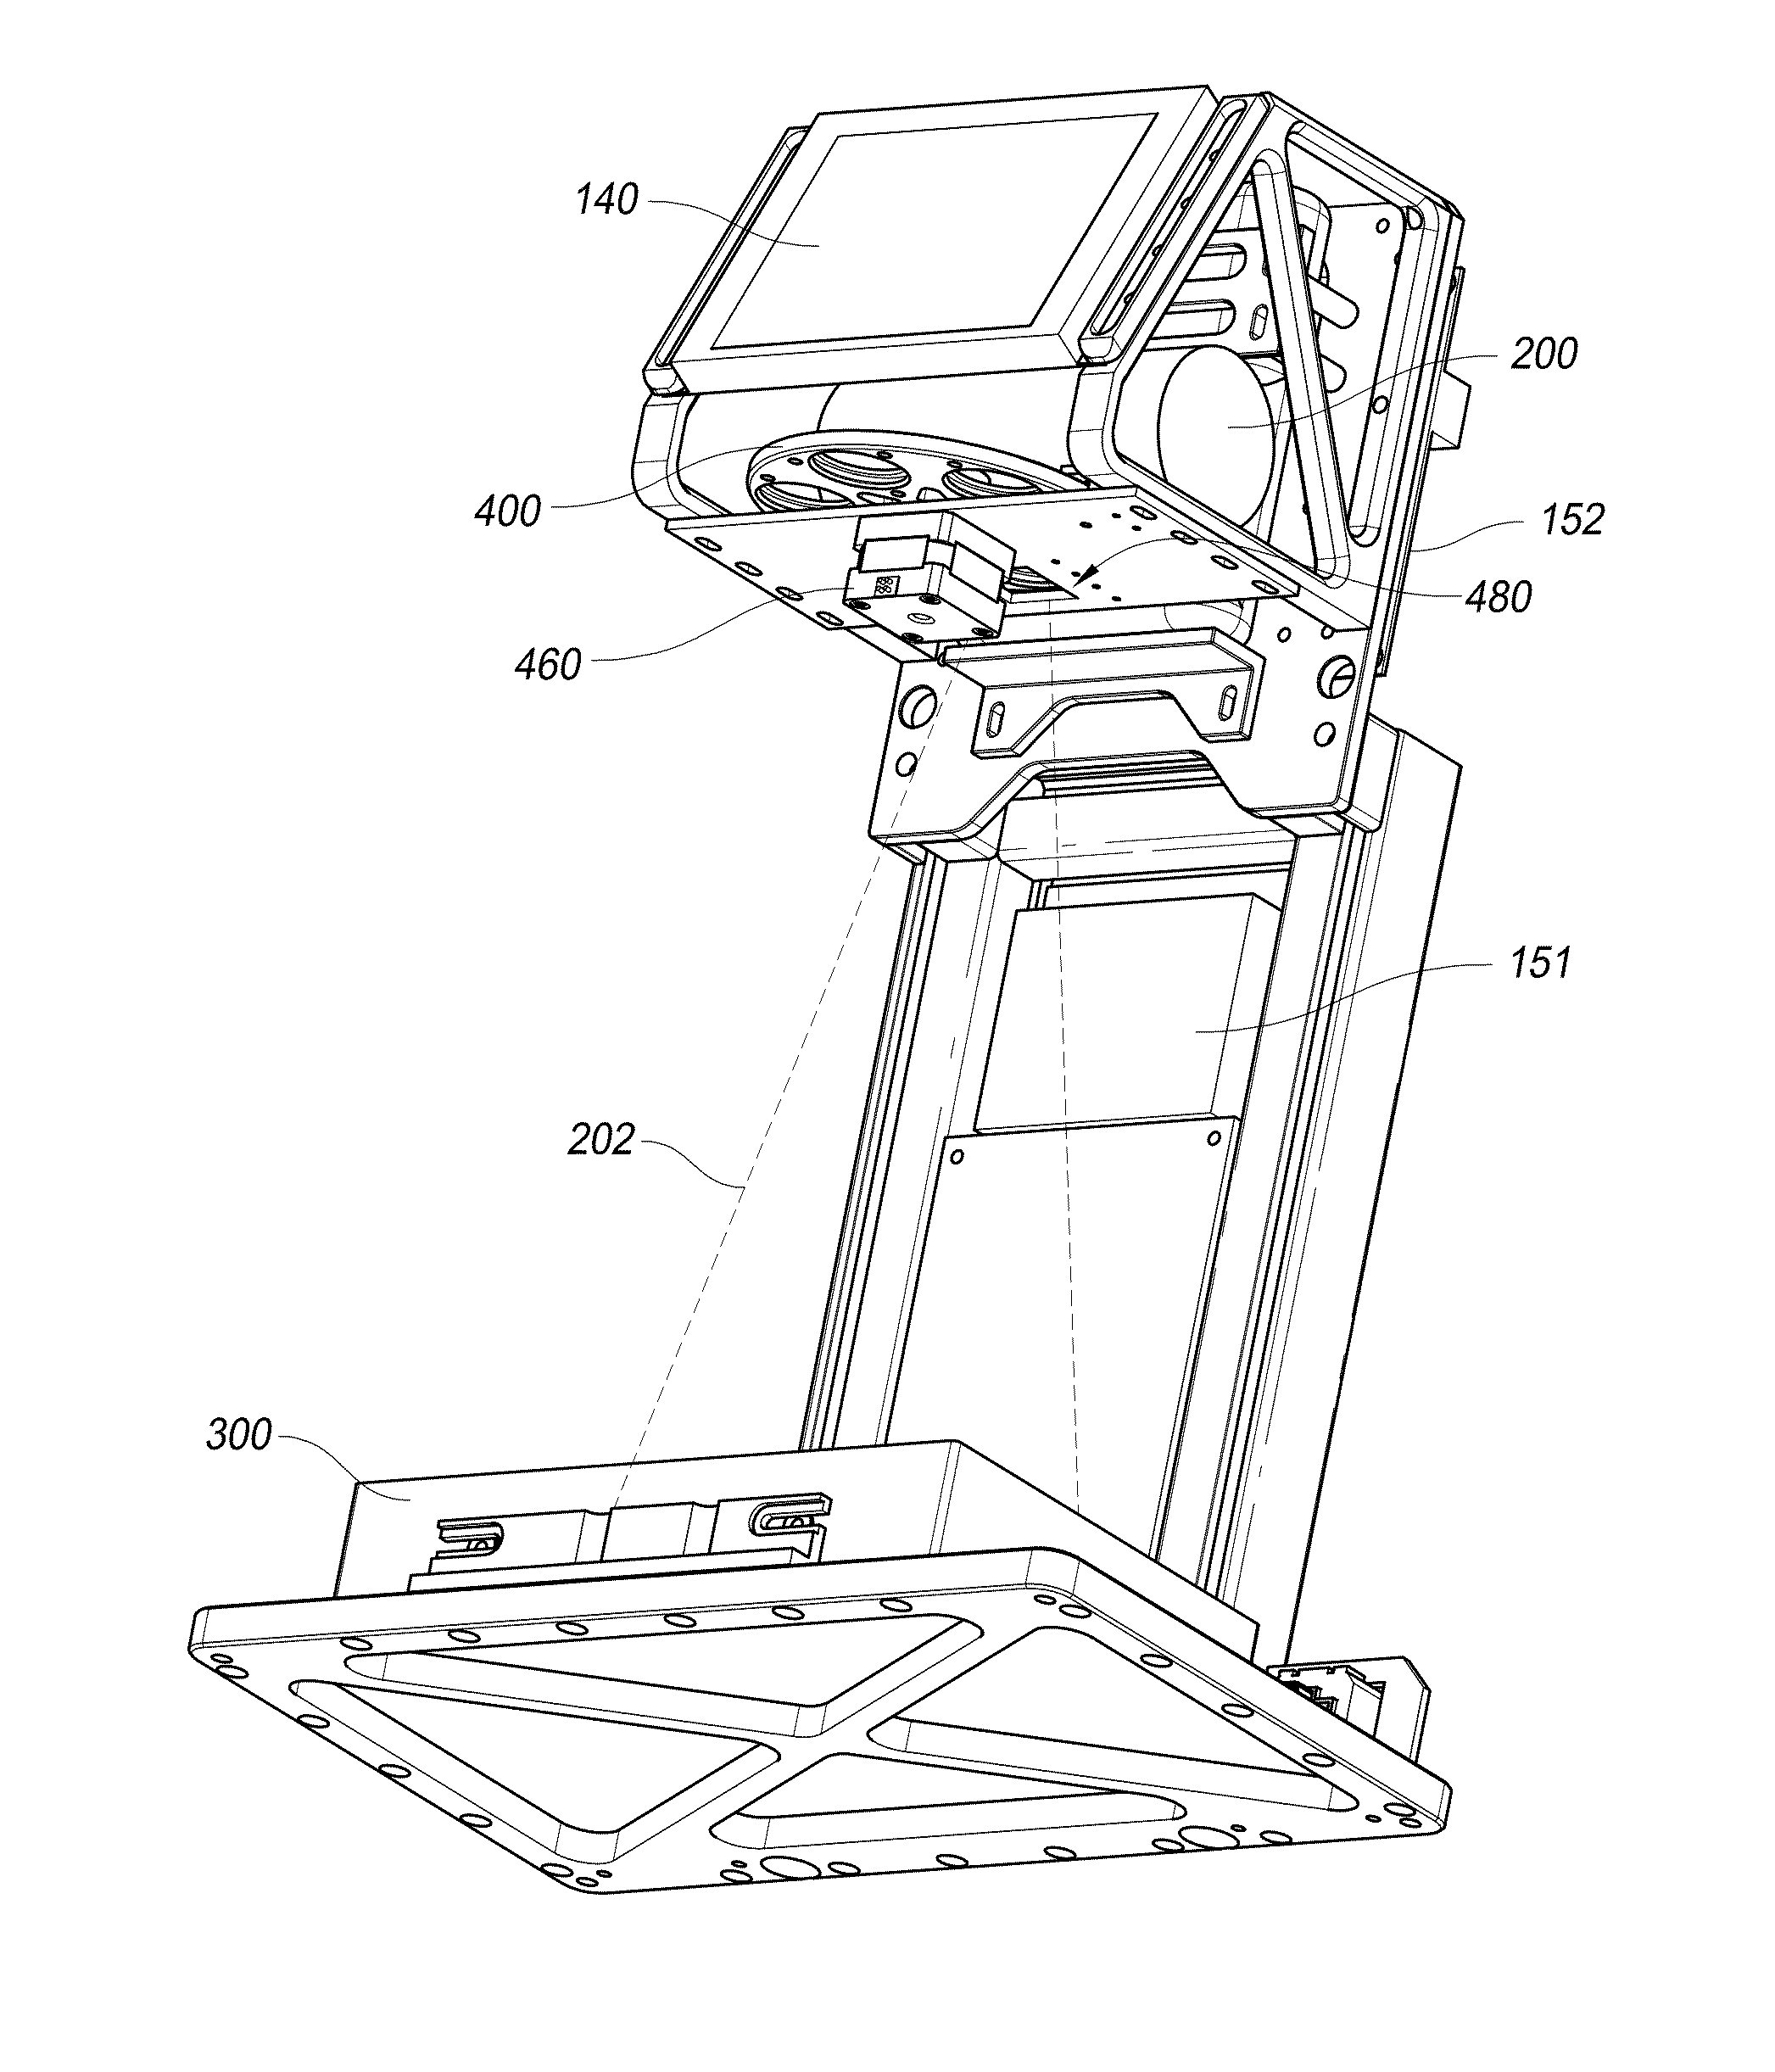 Portable dual-energy radiographic x-ray perihpheral bone density and imaging systems and methods